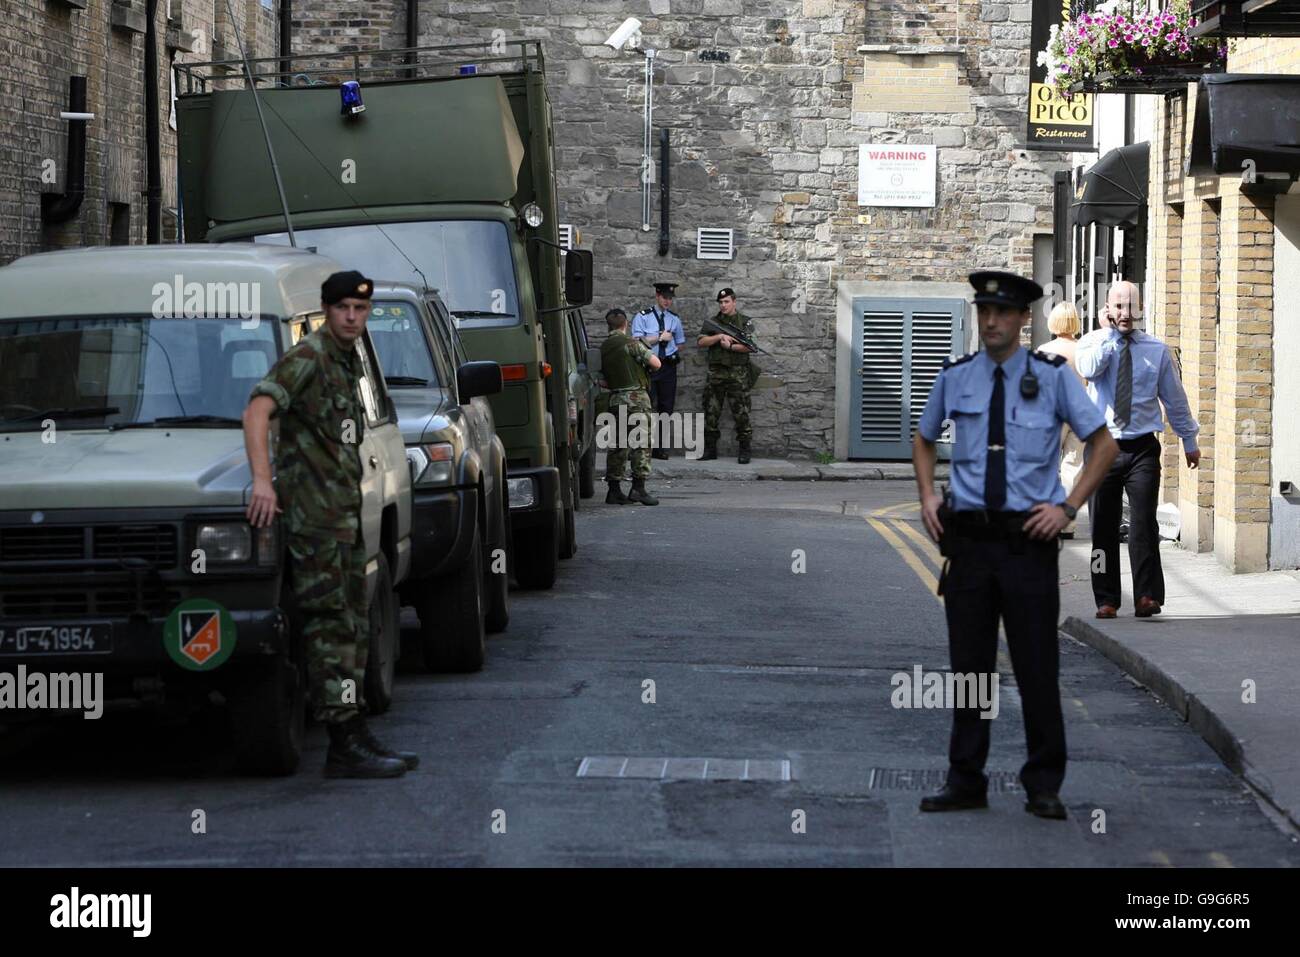 Soldiers patrol the streets around the Mansion House in Dublin city centre while a special unit conducts a search for a suspect device. Stock Photo